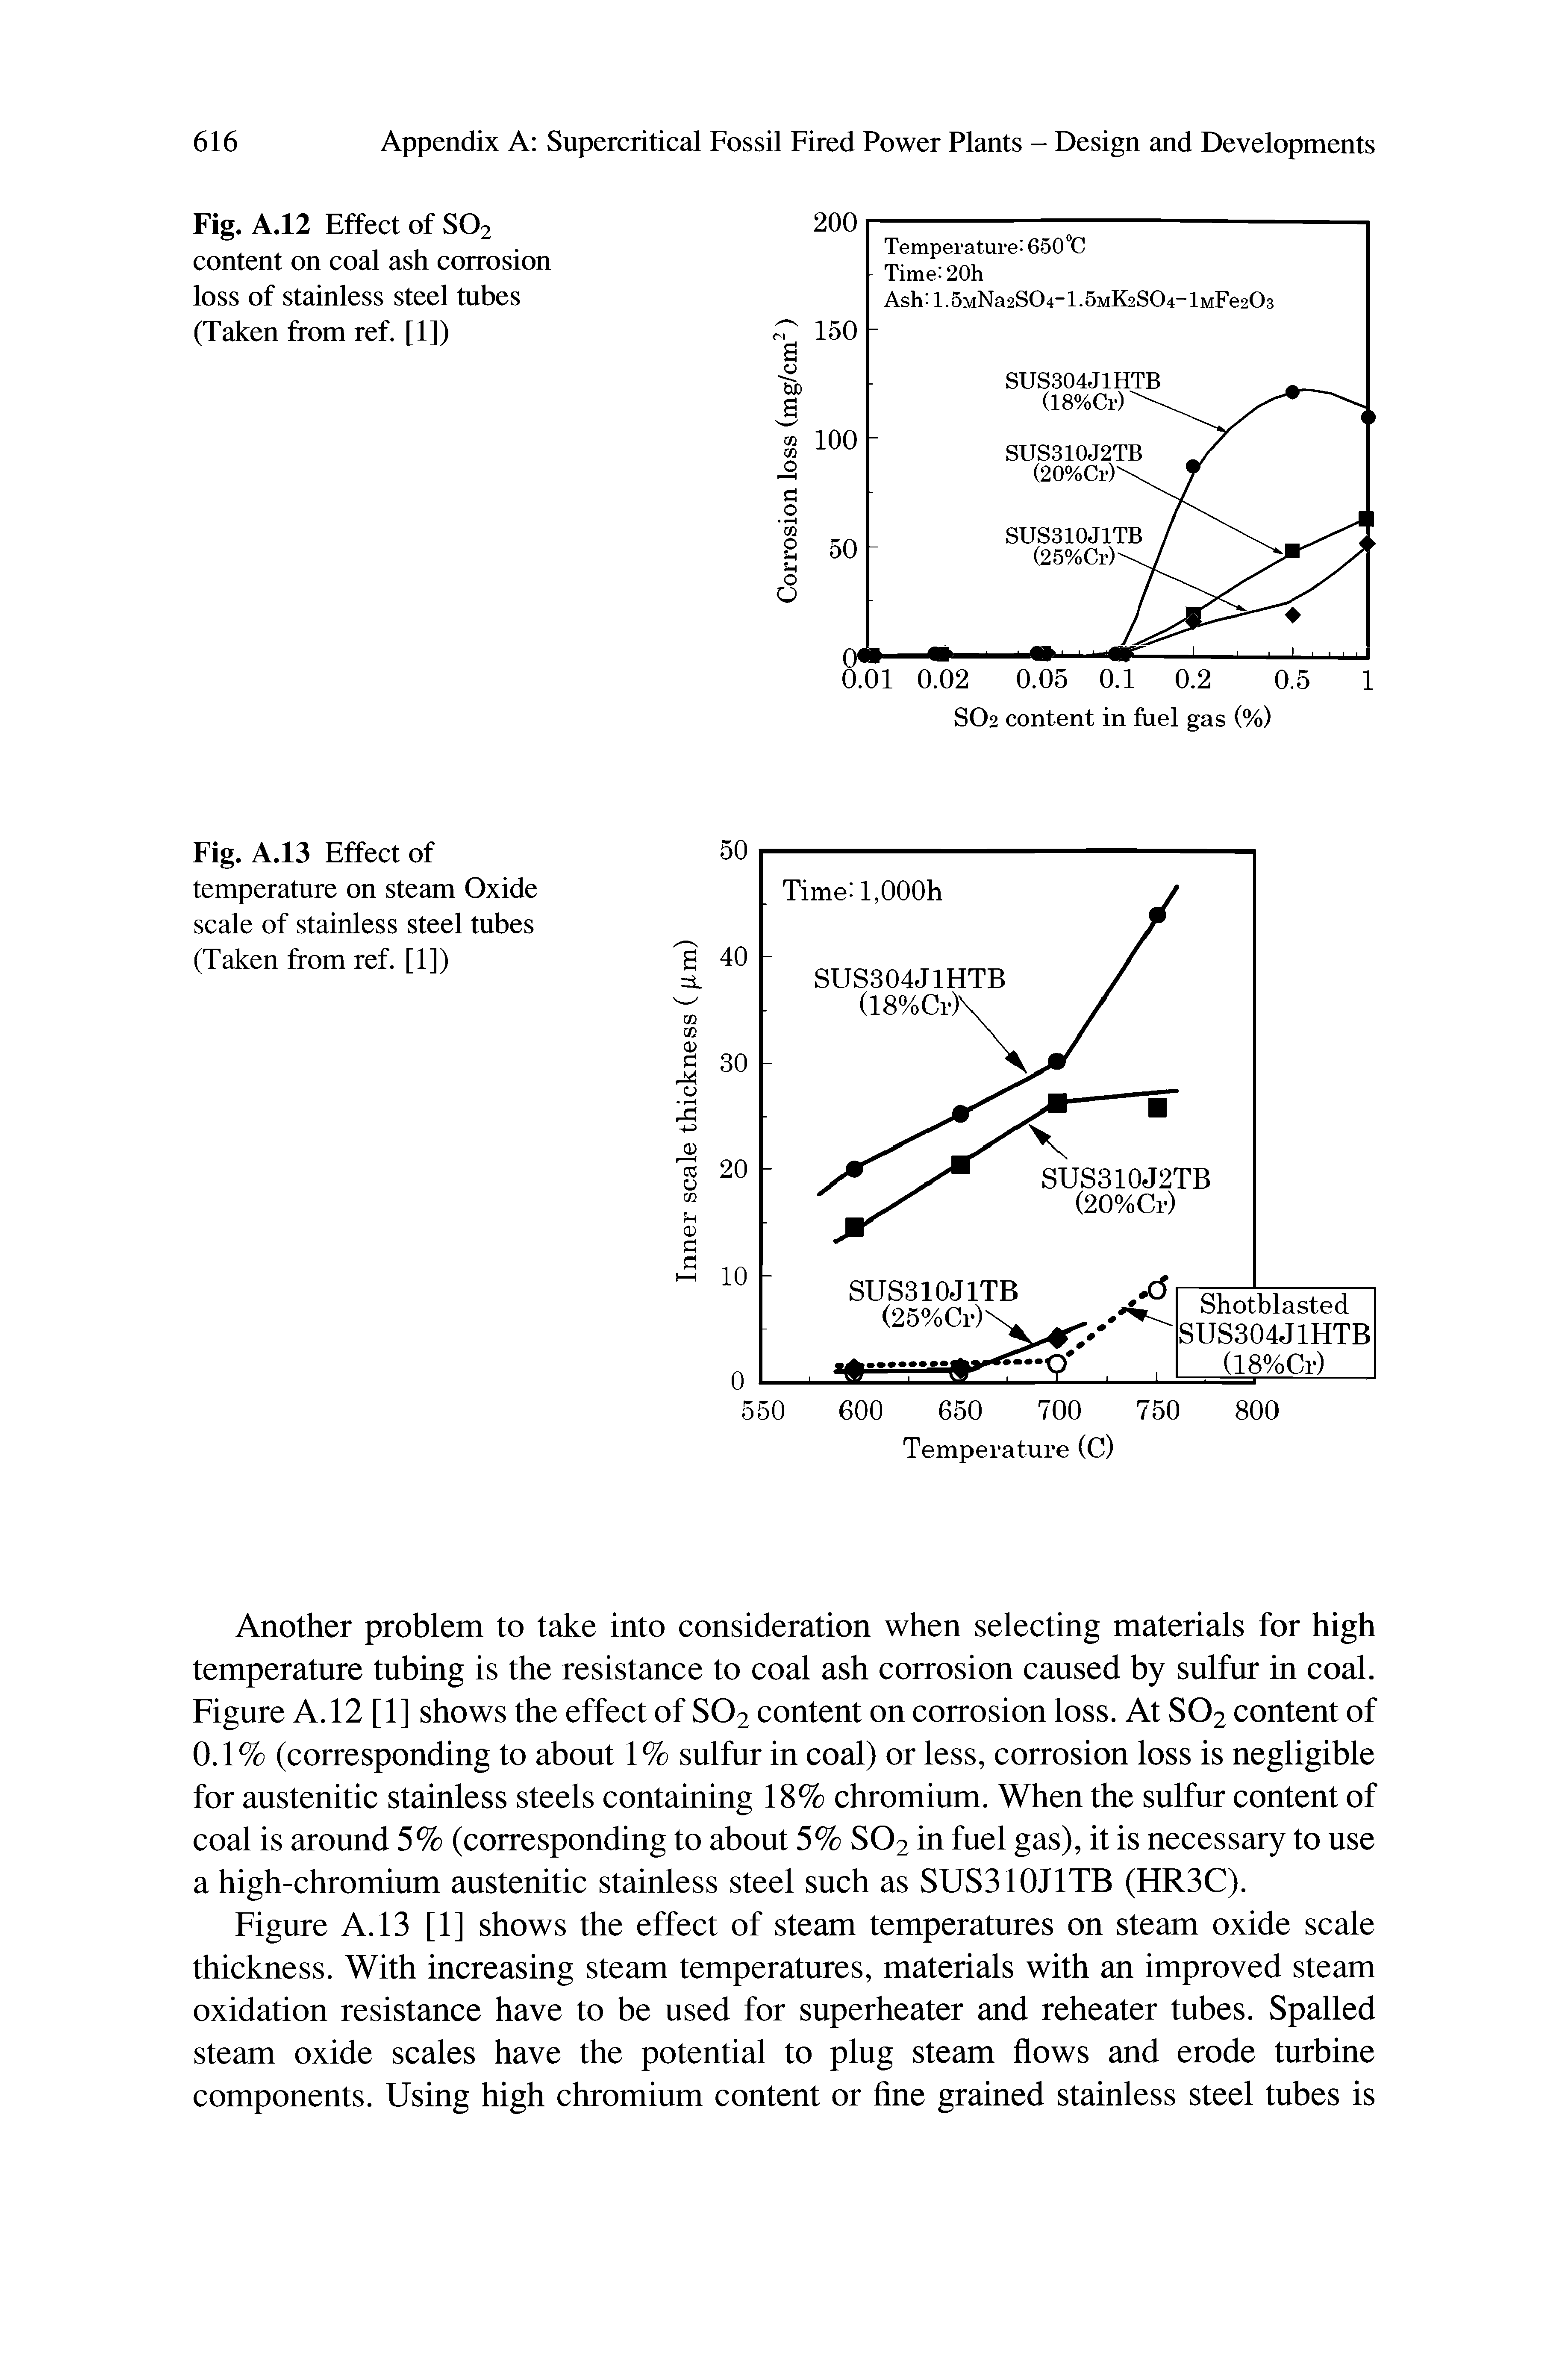 Figure A.13 [1] shows the effect of steam temperatures on steam oxide scale thickness. With increasing steam temperatures, materials with an improved steam oxidation resistance have to be used for superheater and reheater tubes. Spalled steam oxide scales have the potential to plug steam flows and erode turbine components. Using high chromium content or fine grained stainless steel tubes is...